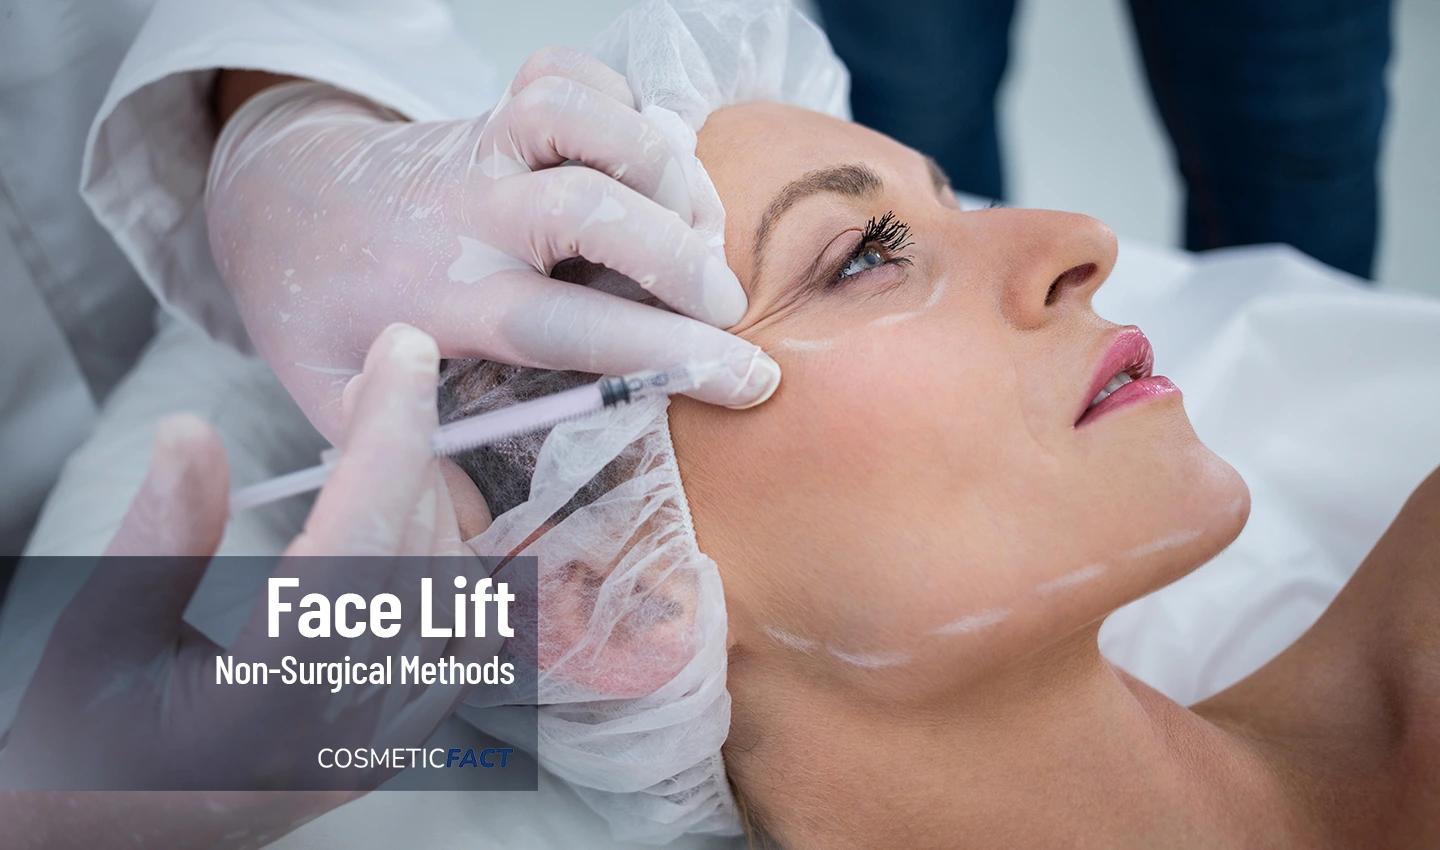 Woman receiving a natural facelift through the injection of dermal fillers